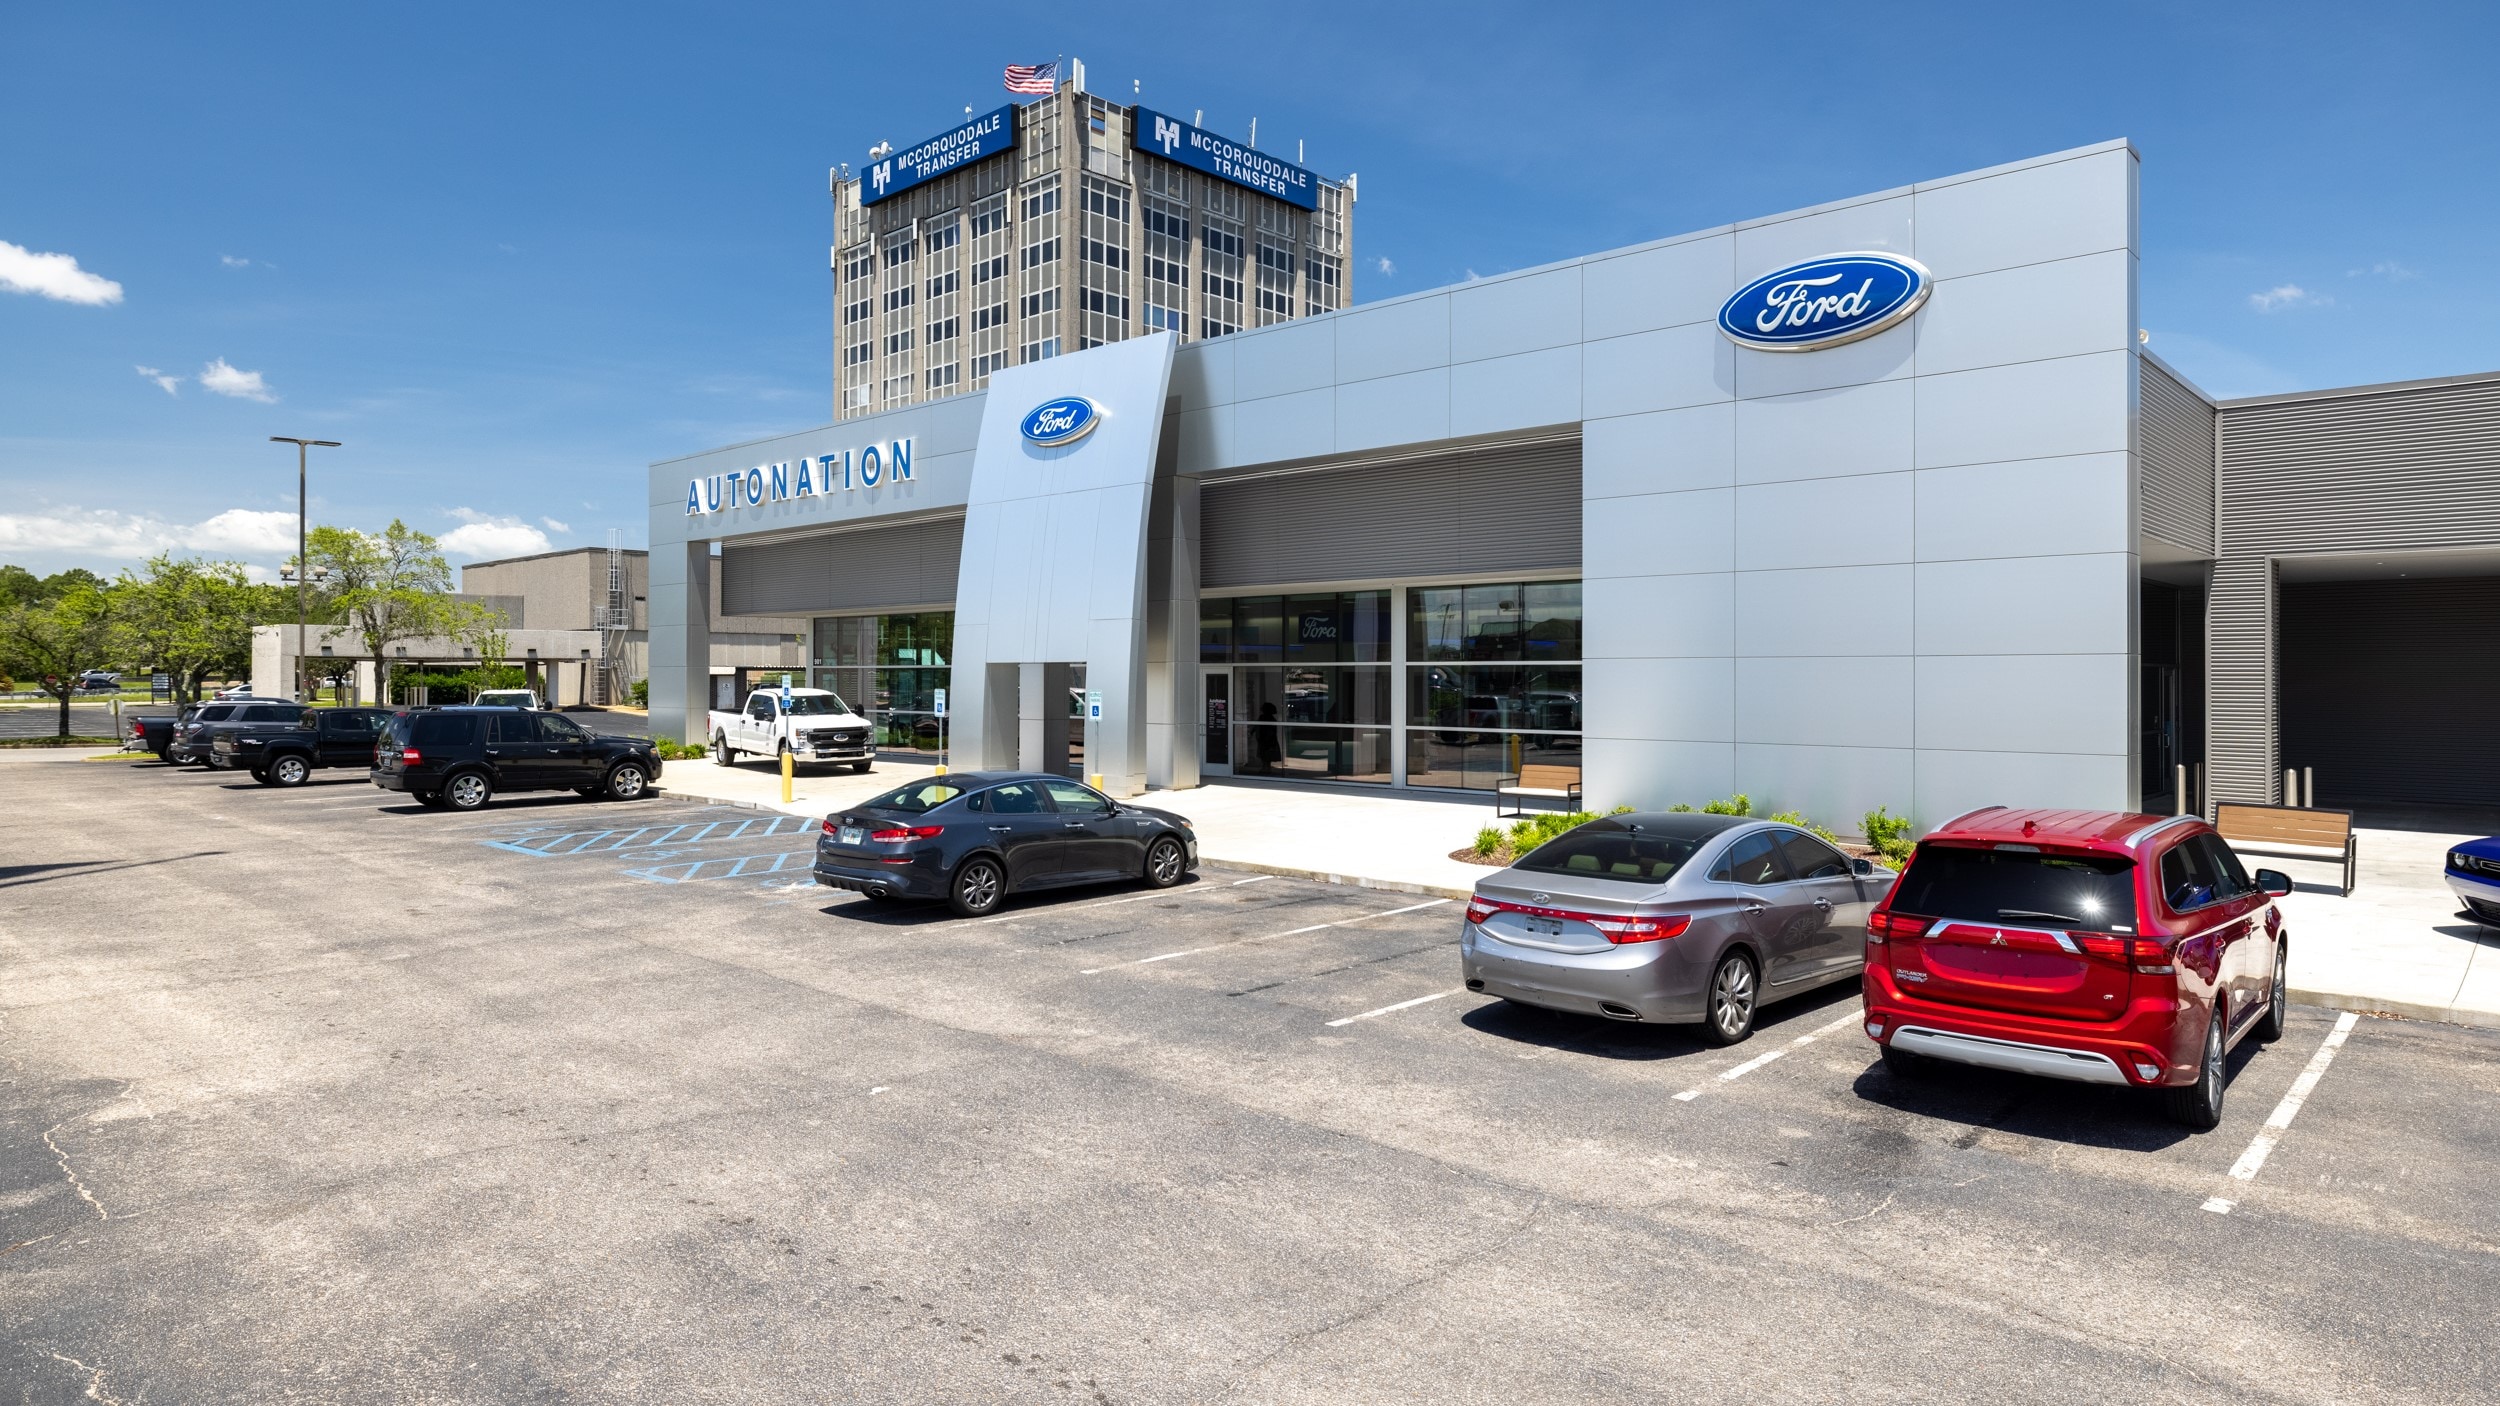 Exterior view of AutoNation Ford Mobile during the day